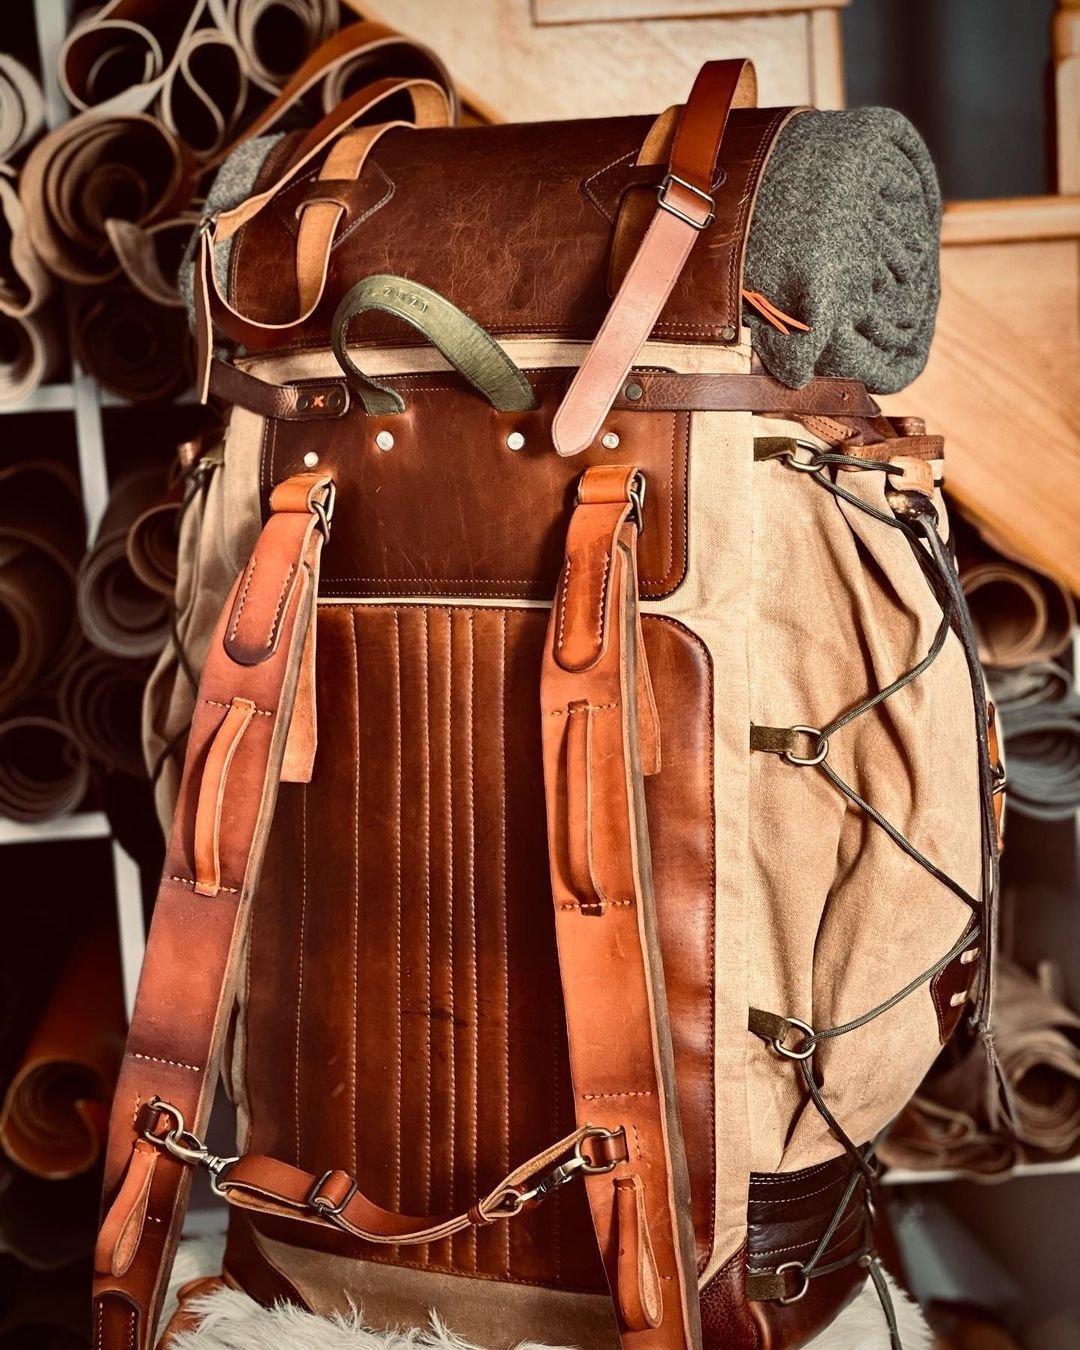 Waxed Canvas and Leather Backpack | 45 L | Handmade Leather, Waxed Backpack for Travel, Camping, Hunting, Hiking | Personalization bushcraft - camping - hiking backpack 99percenthandmade   